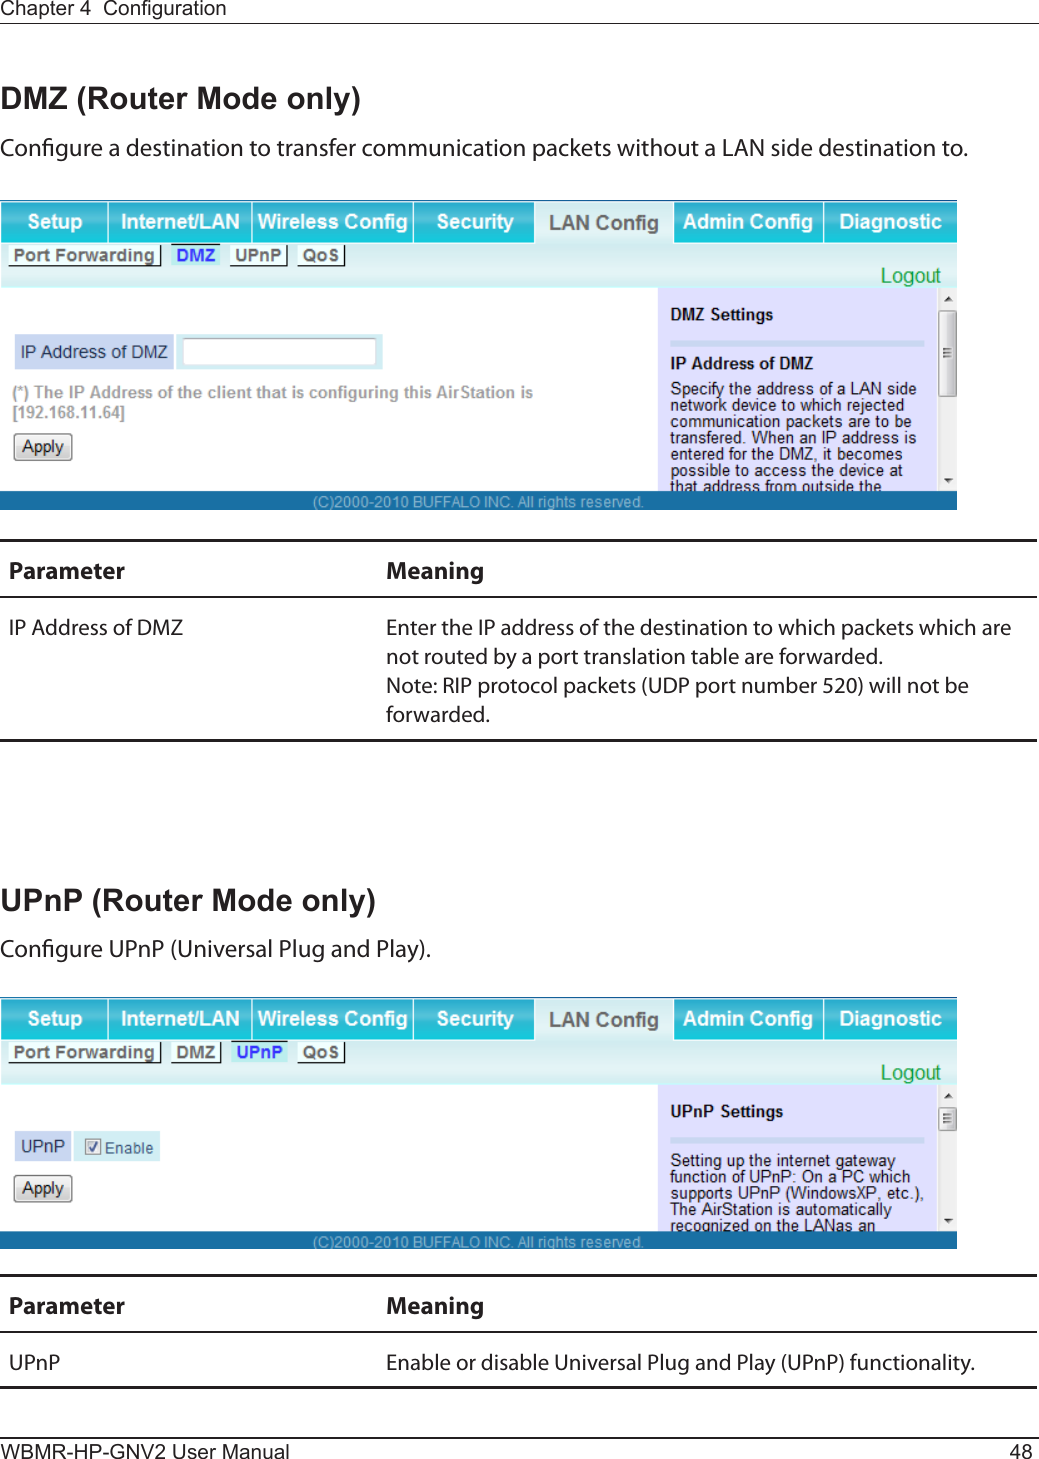 WBMR-HP-GNV2 User Manual 48Chapter 4  CongurationDMZ (Router Mode only)Congure a destination to transfer communication packets without a LAN side destination to.Parameter MeaningIP Address of DMZ Enter the IP address of the destination to which packets which are not routed by a port translation table are forwarded.Note: RIP protocol packets (UDP port number 520) will not be forwarded.UPnP (Router Mode only)Congure UPnP (Universal Plug and Play).Parameter MeaningUPnP Enable or disable Universal Plug and Play (UPnP) functionality.